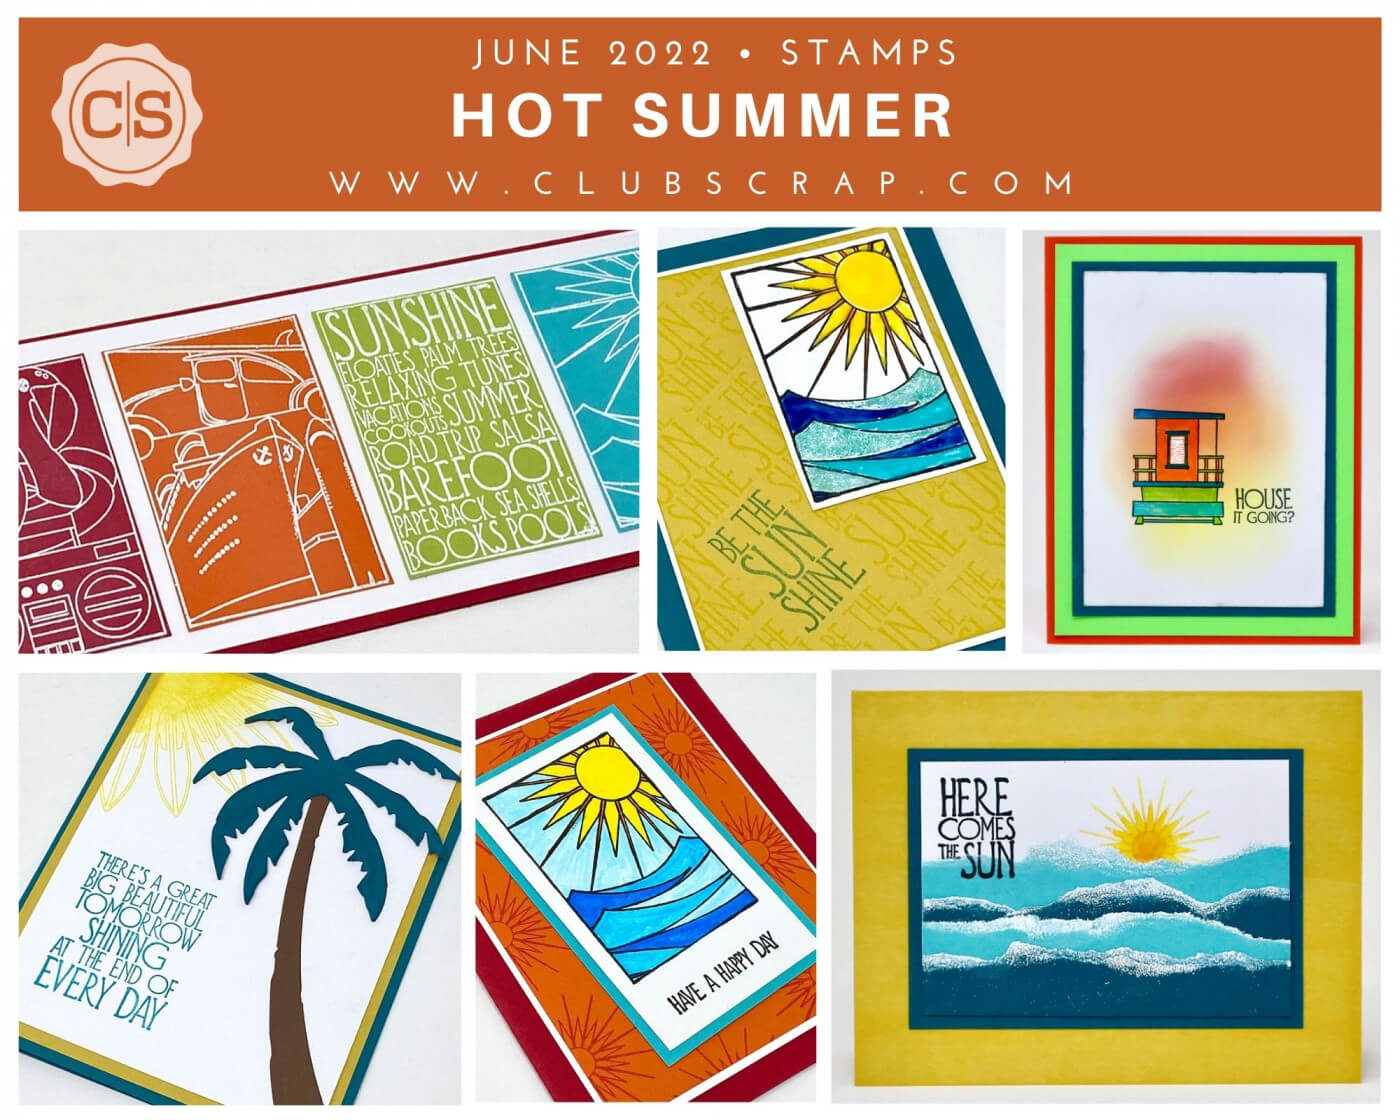 Hot Summer Spoiler - Stamps by Club Scrap #clubscrap